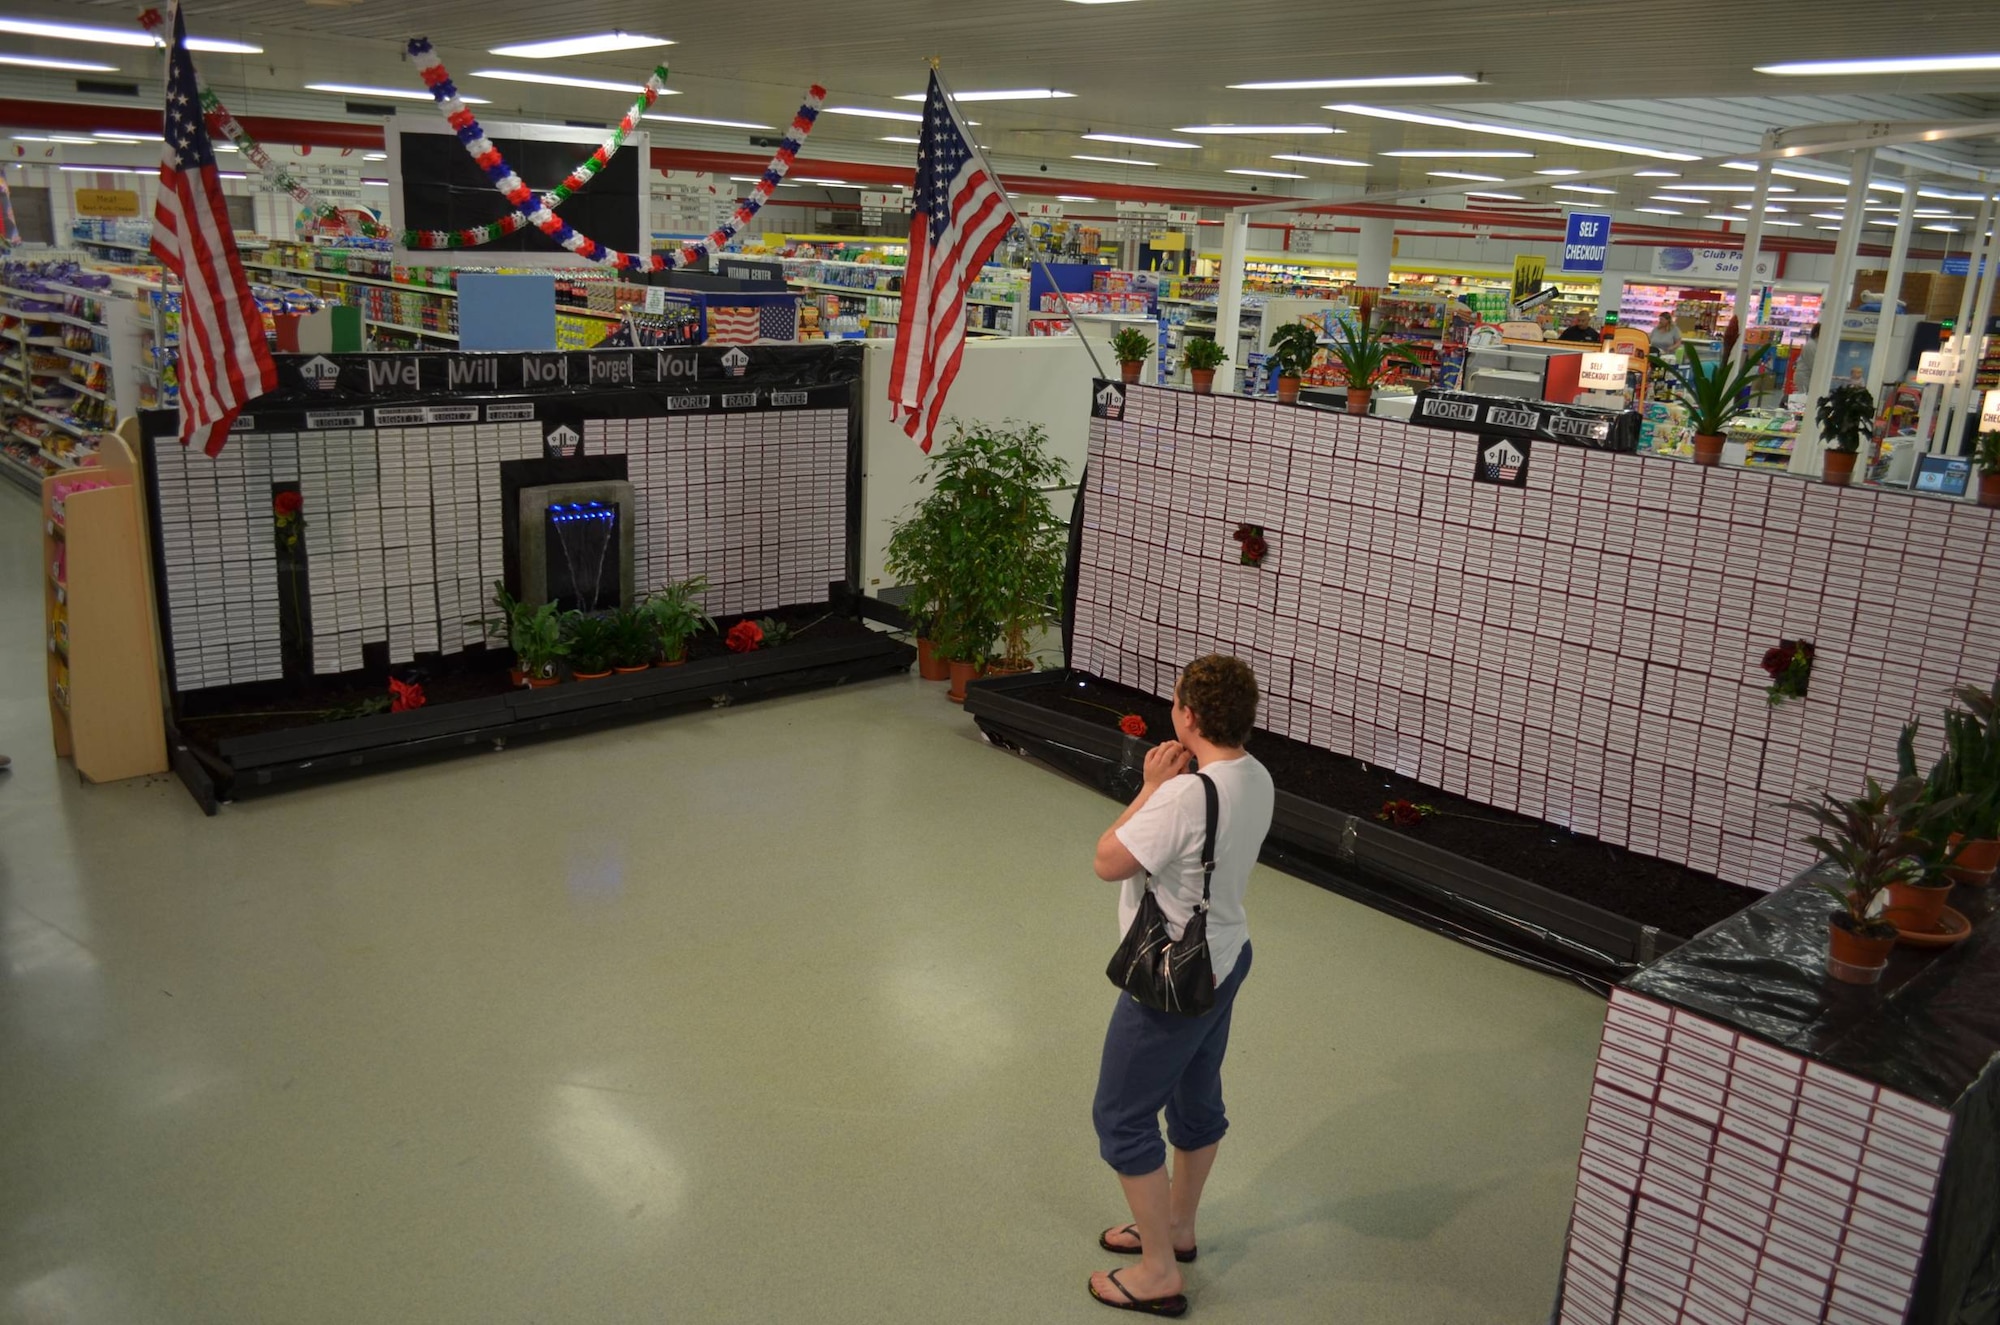 BITBURG BASE ANNEX, Germany --- A shopper reviews a “Hall of Heroes” display commemorating the 10th anniversary of 9/11 as she shops at the Bitburg Base Annex Commissary in this September 2011 photo. The commissary ceased operations Oct. 31, 2013. (Courtesy photo)